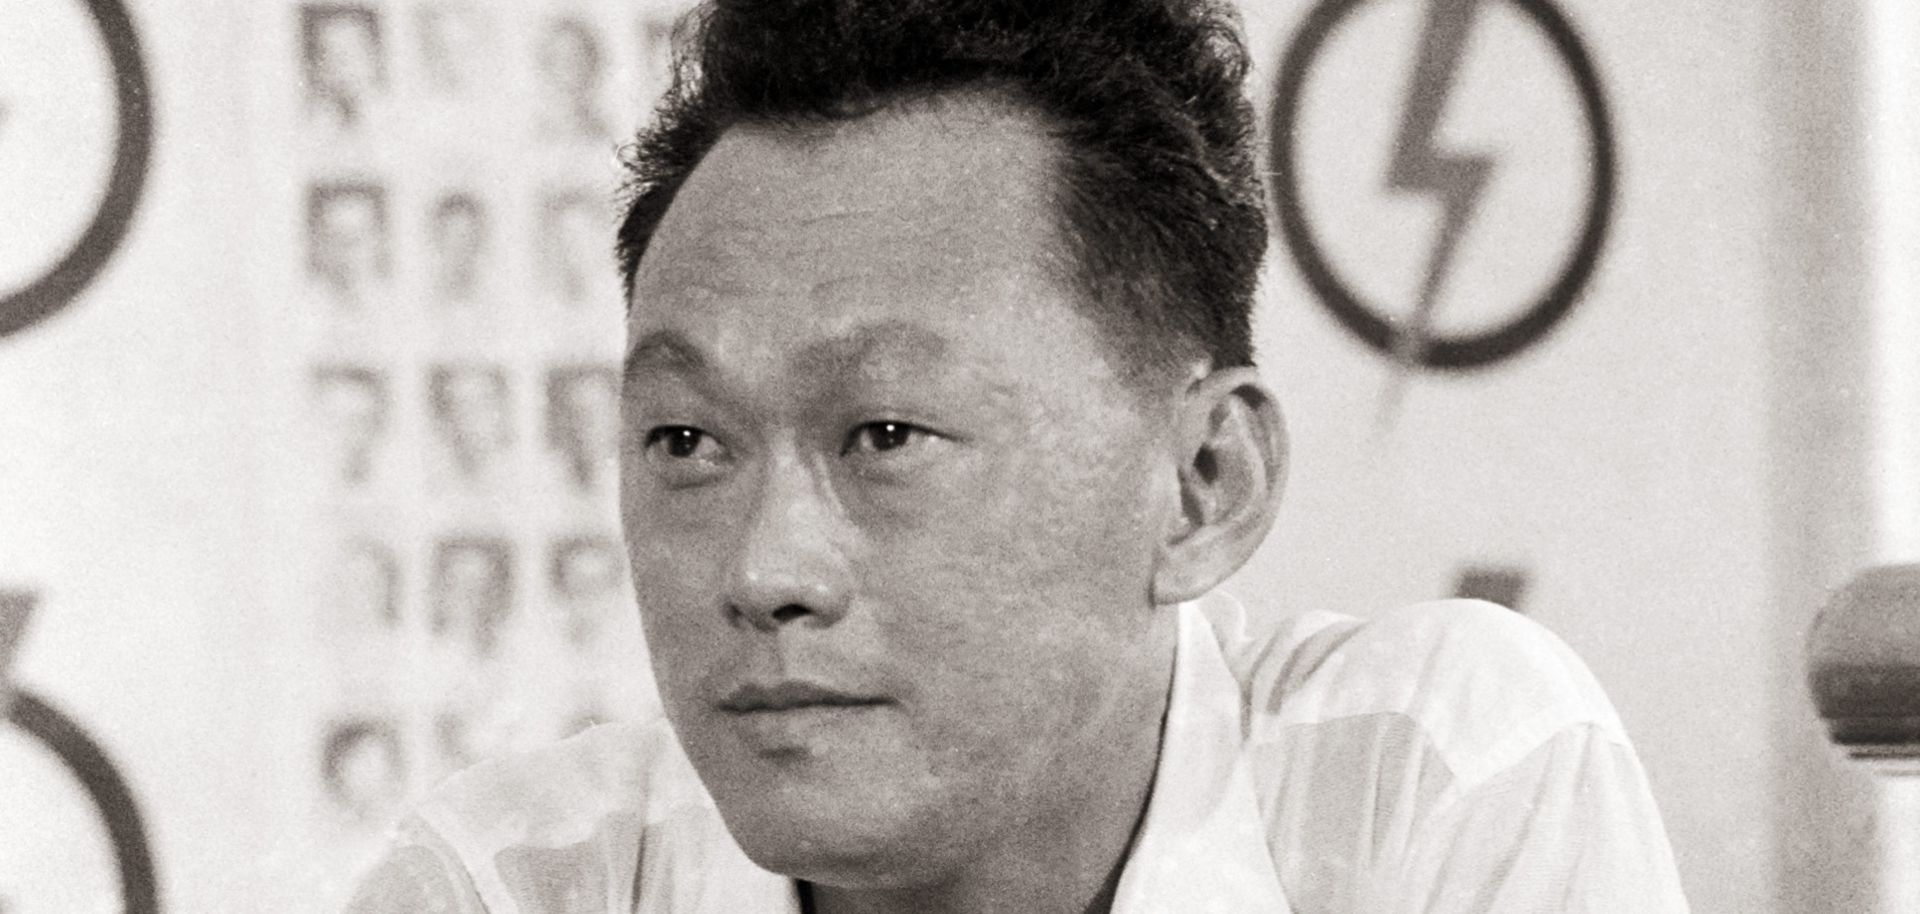 Lee Kuan Yew poses on June 5, 1959 after winning the elections in Singapore.